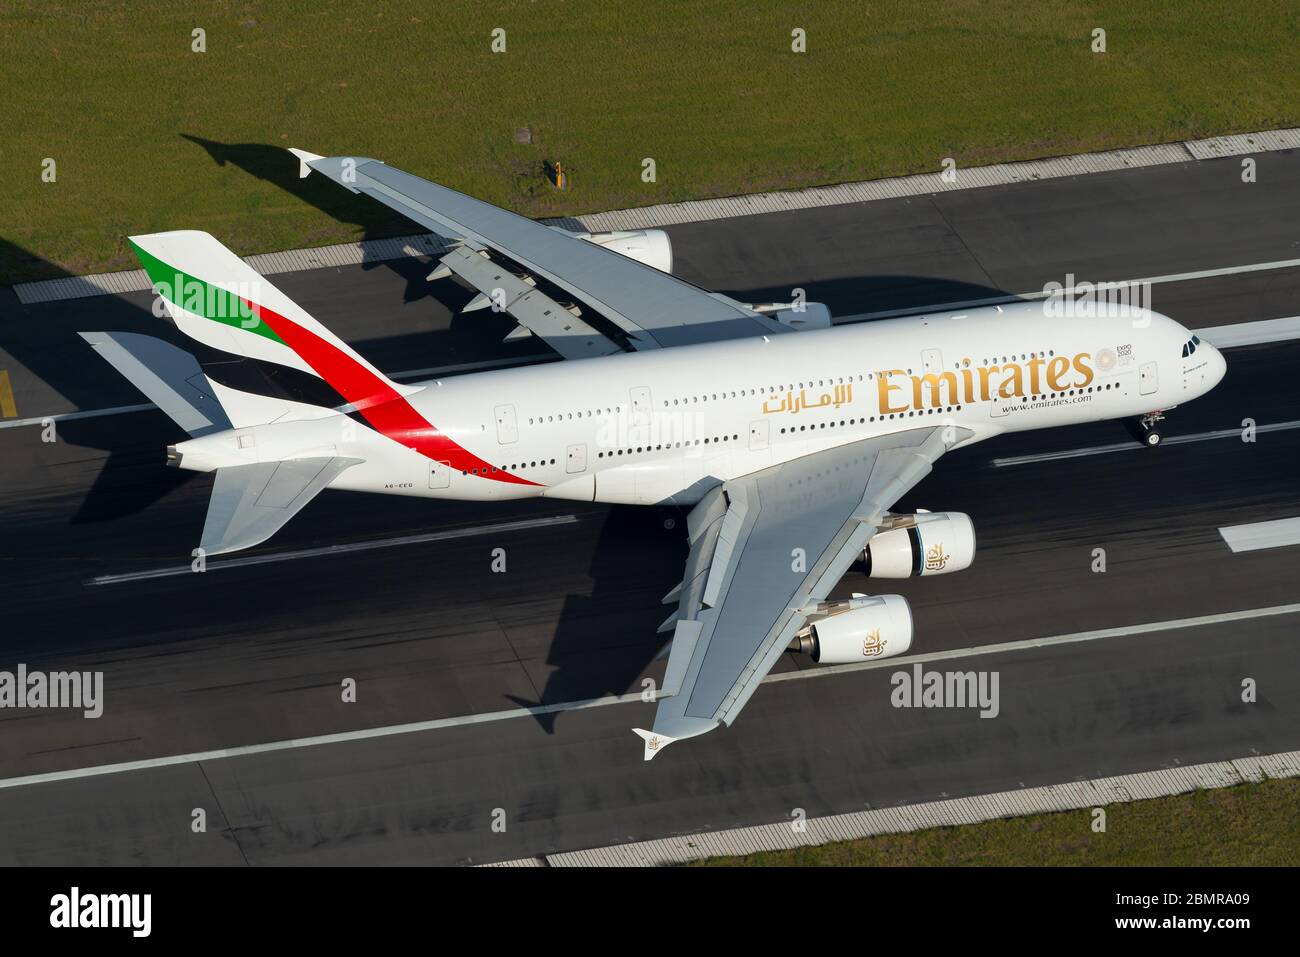 Emirates Airline Airbus A380 landing in Sydney Kingsford Smith international Airport in Australia. A380-800 A6-EEG deploying wing flaps and slats. Stock Photo